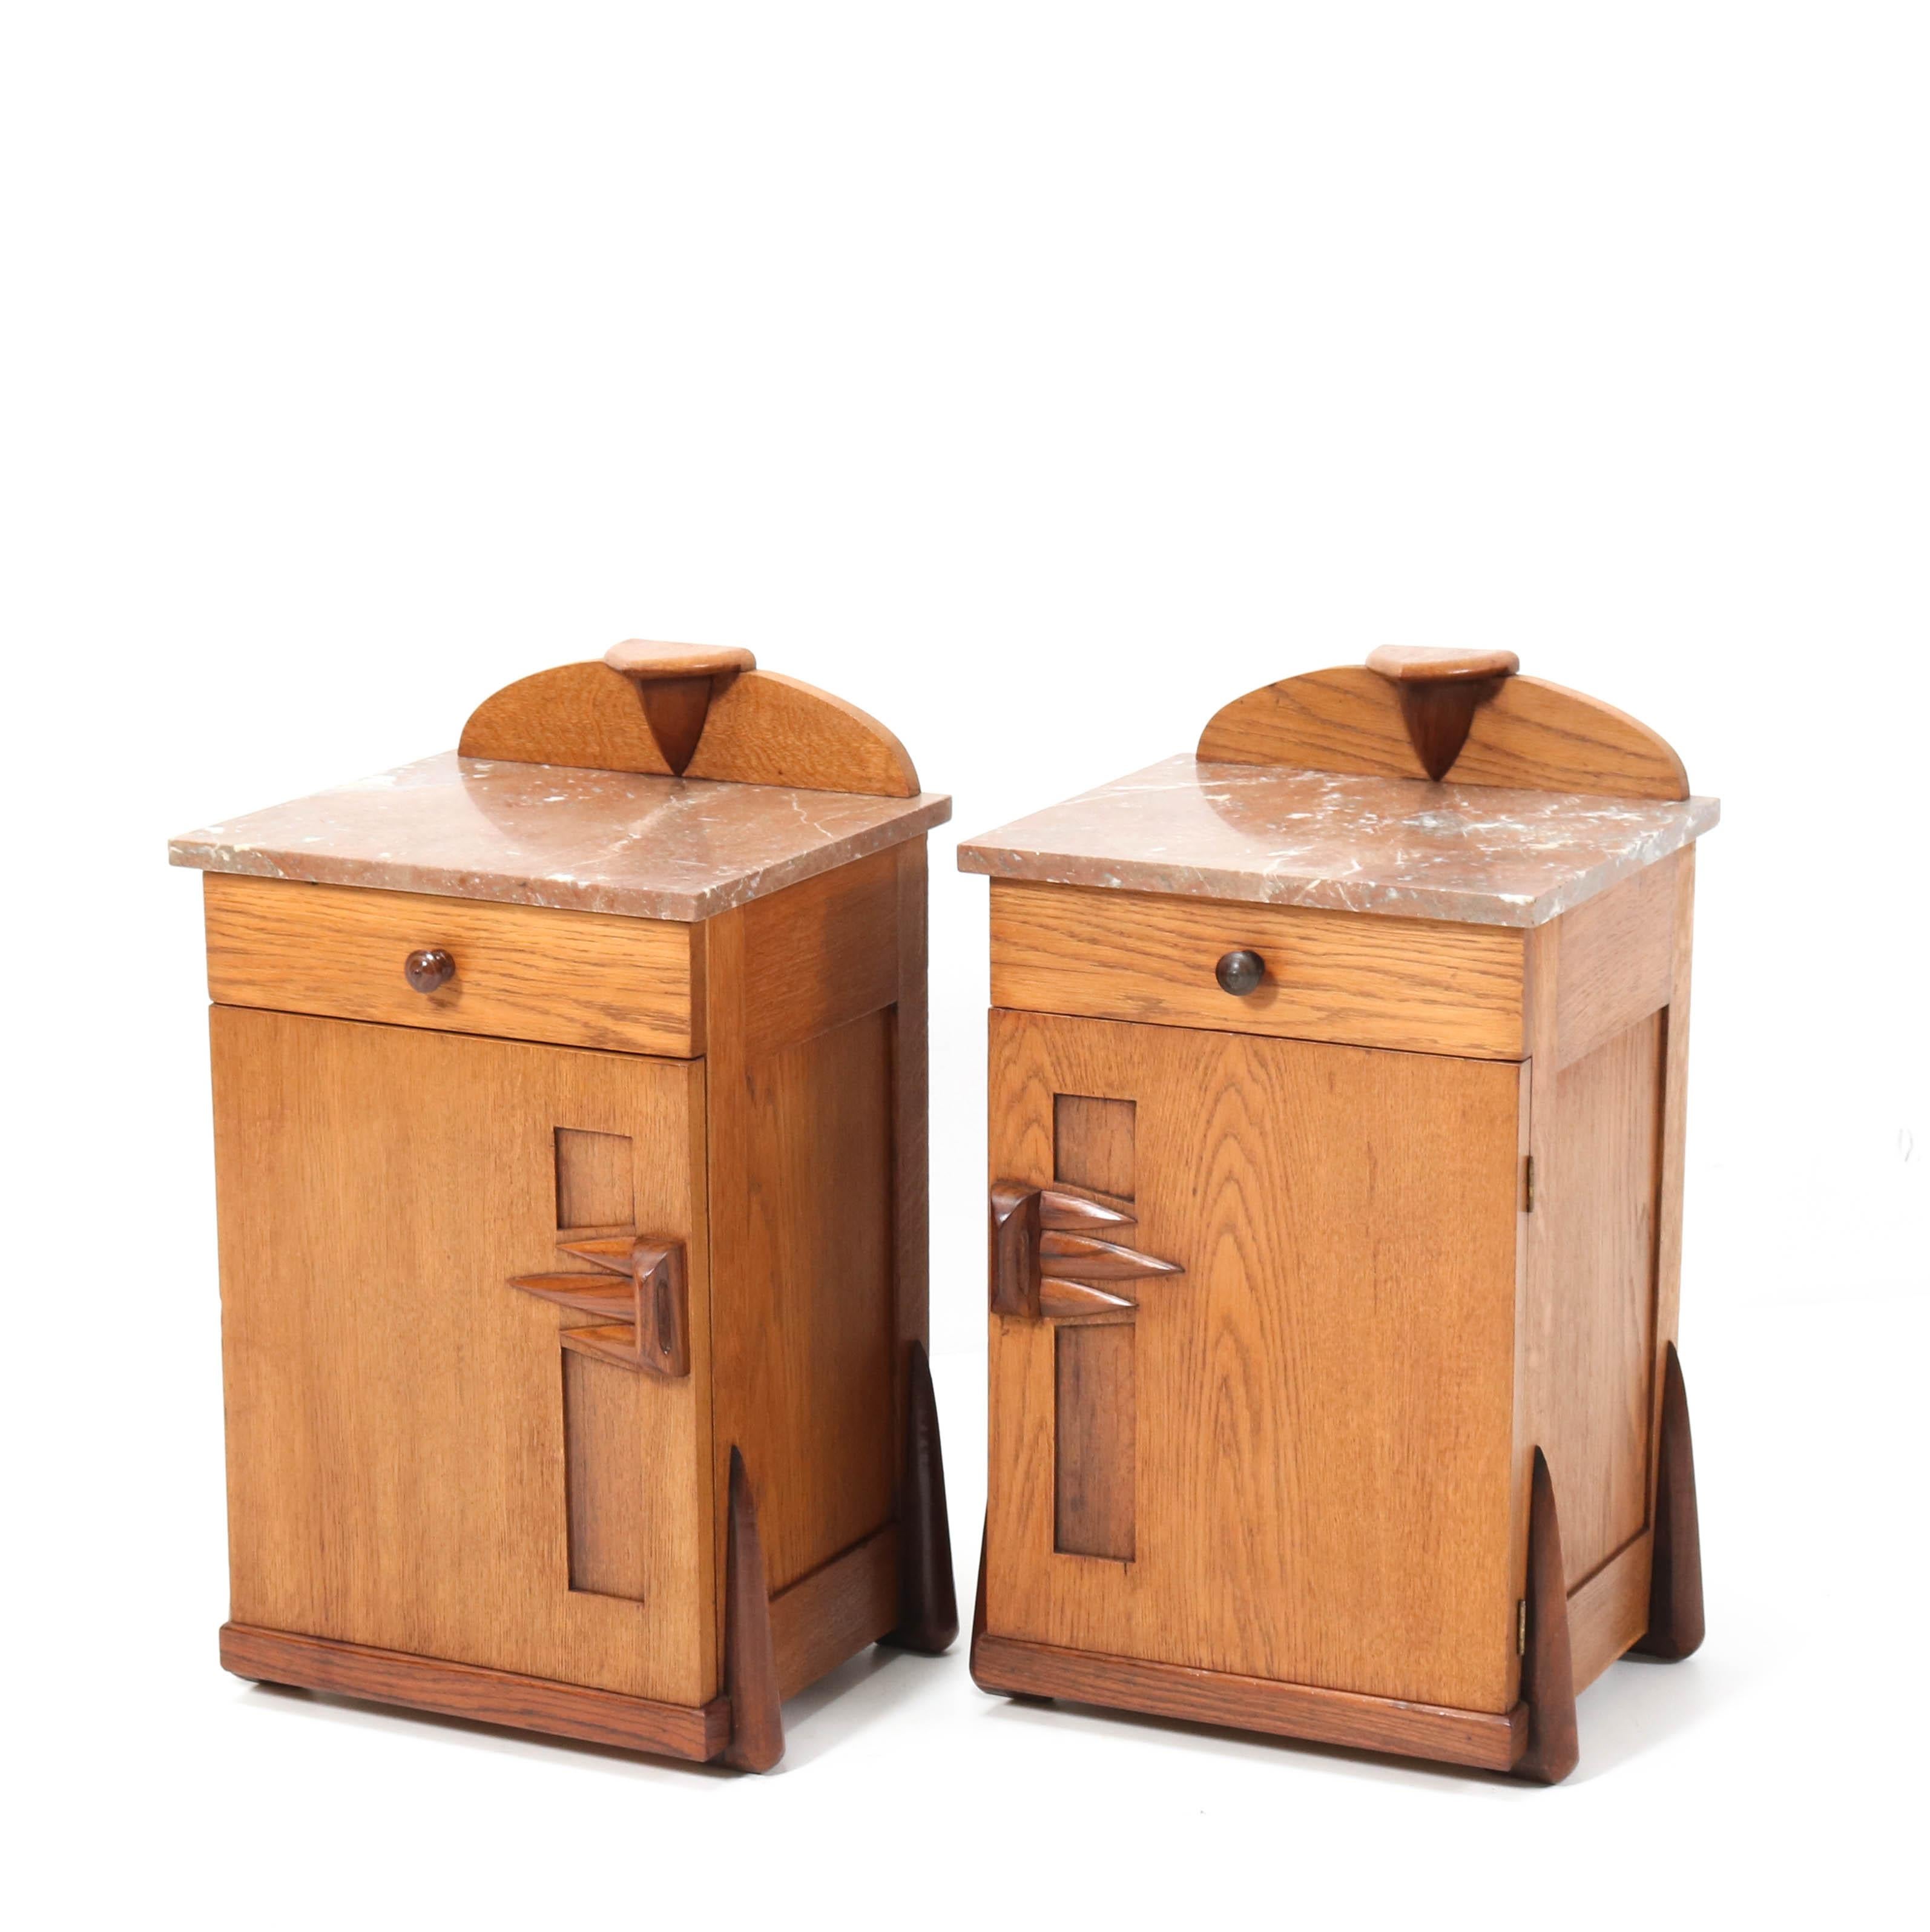 Two Oak Art Deco Amsterdamse School Nightstands or Bedside Tables by Max Coini 1